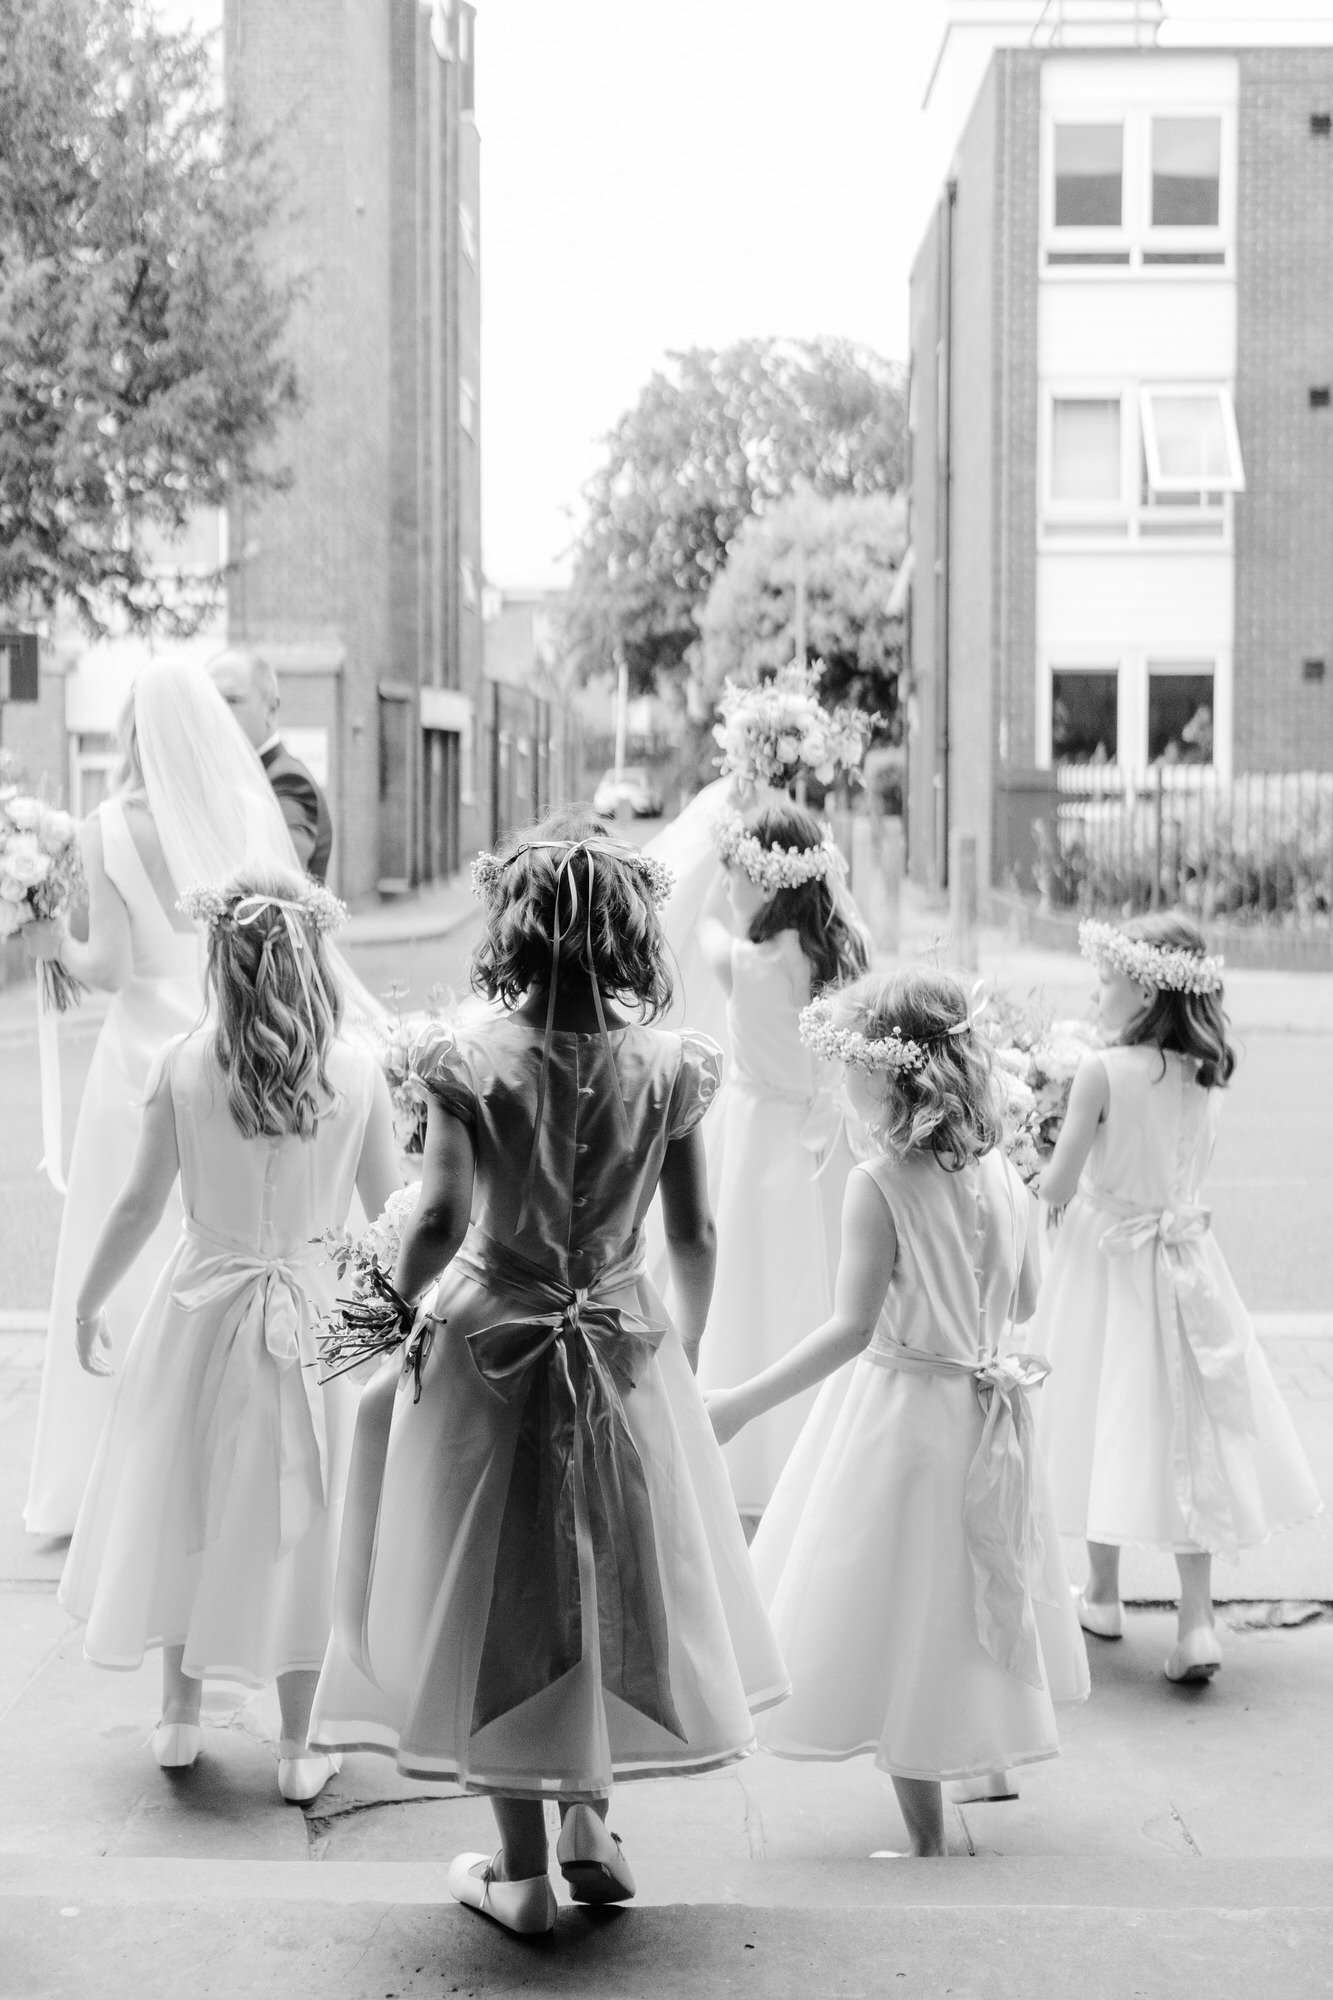 Black and white image of five little bridesmaids helping the bride exit the church as they hold her dress from behind